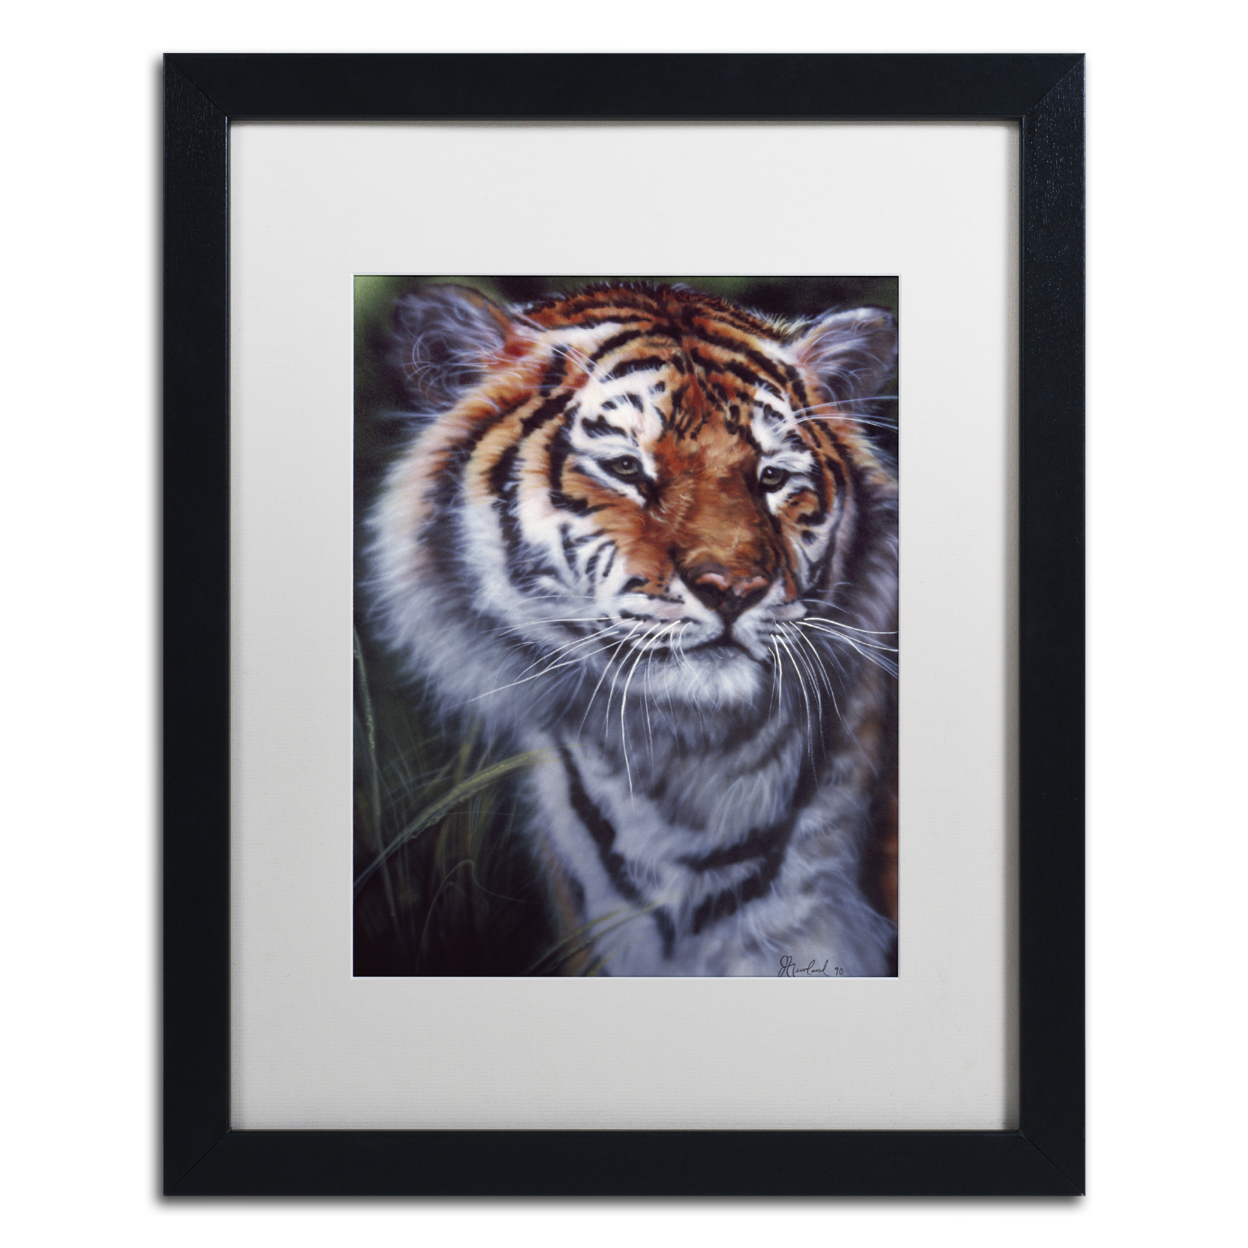 Jenny Newland 'Tiger In The Midst' Black Wooden Framed Art 18 X 22 Inches